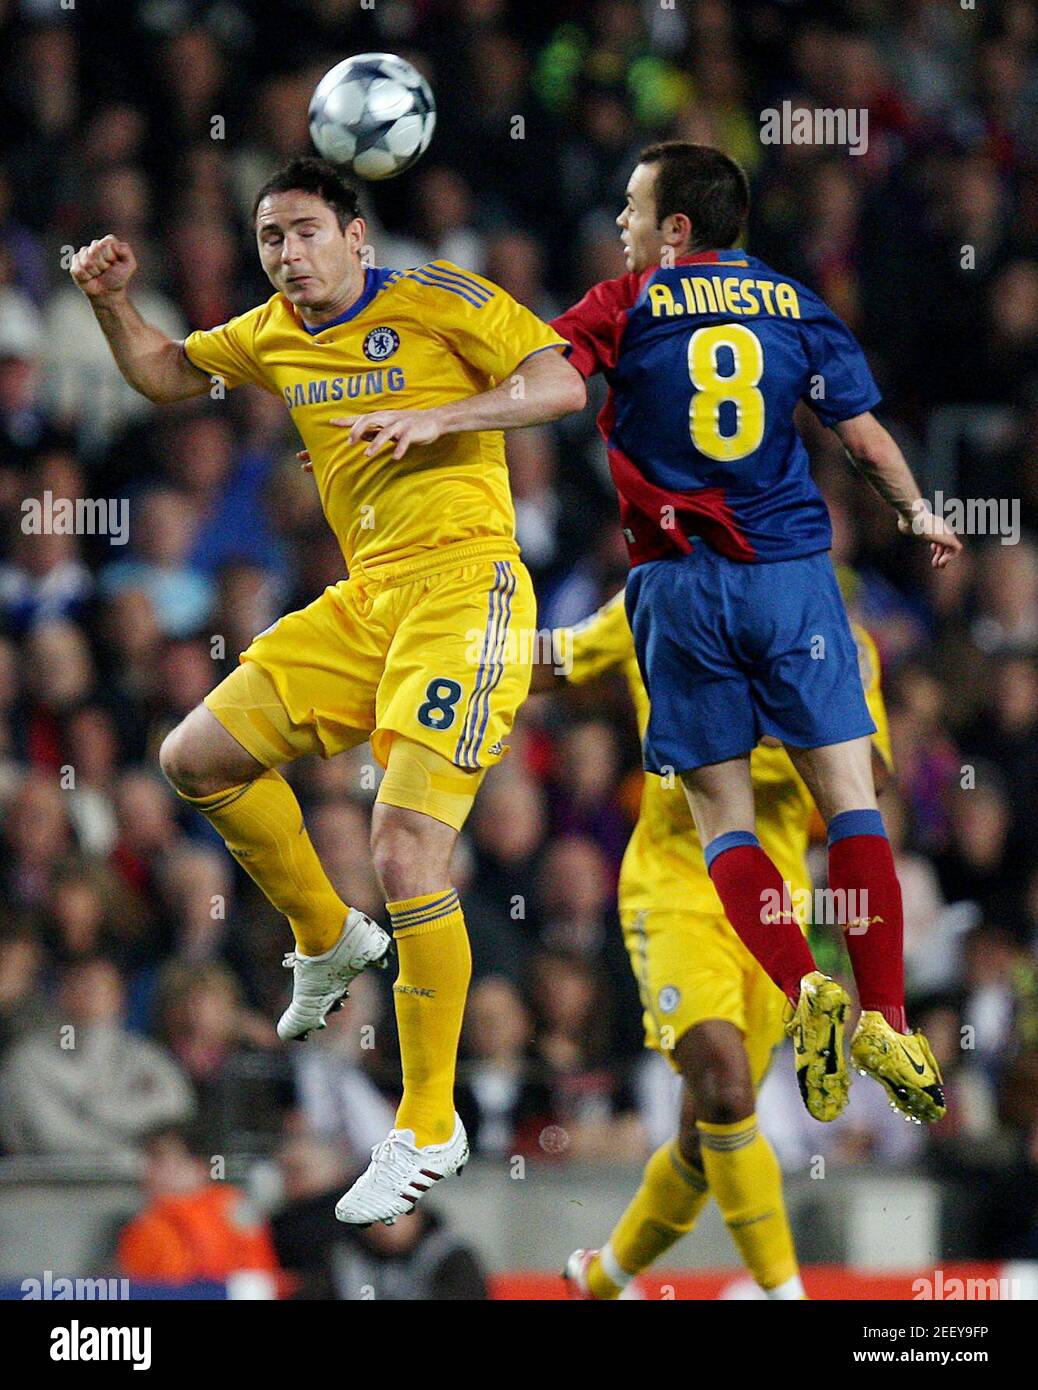 Football Fc Barcelona V Chelsea Uefa Champions League Semi Final First Leg The Nou Camp Barcelona Spain 28 4 09 Chelsea S Frank Lampard L And Barcelona S Andres Iniesta In Action Mandatory